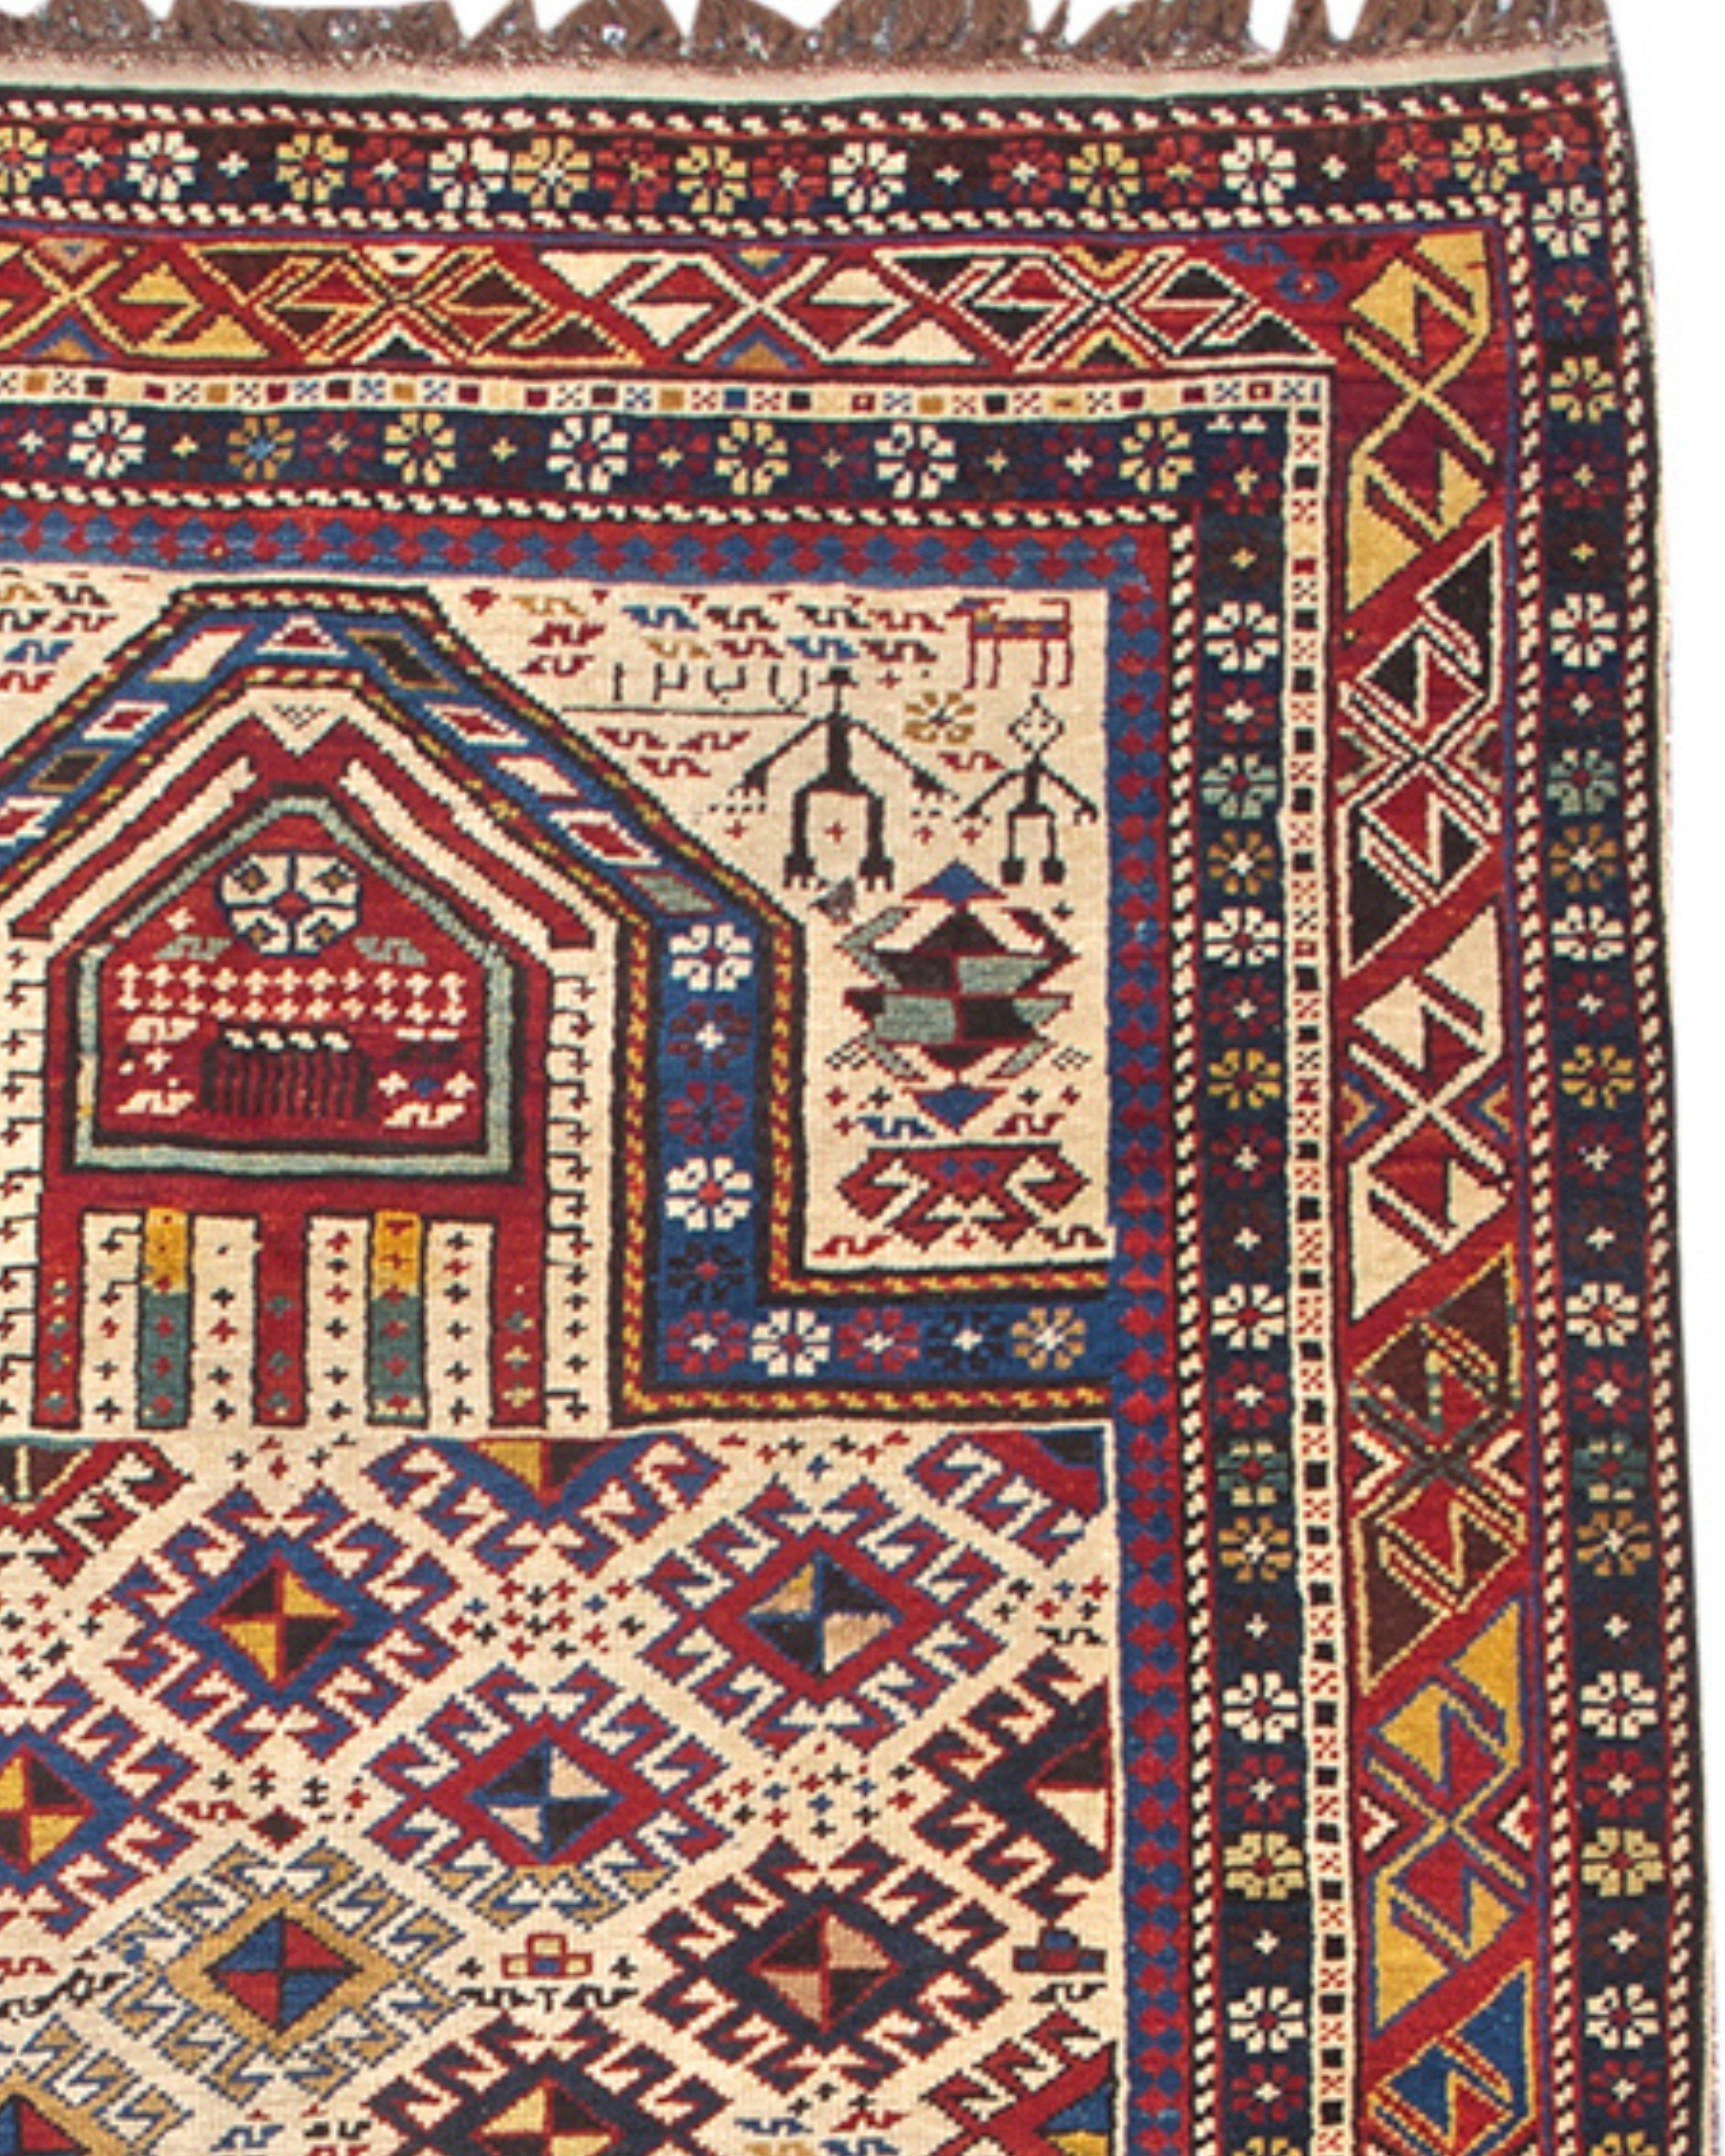 Shirvan Prayer Rug, 19th century In Excellent Condition For Sale In San Francisco, CA